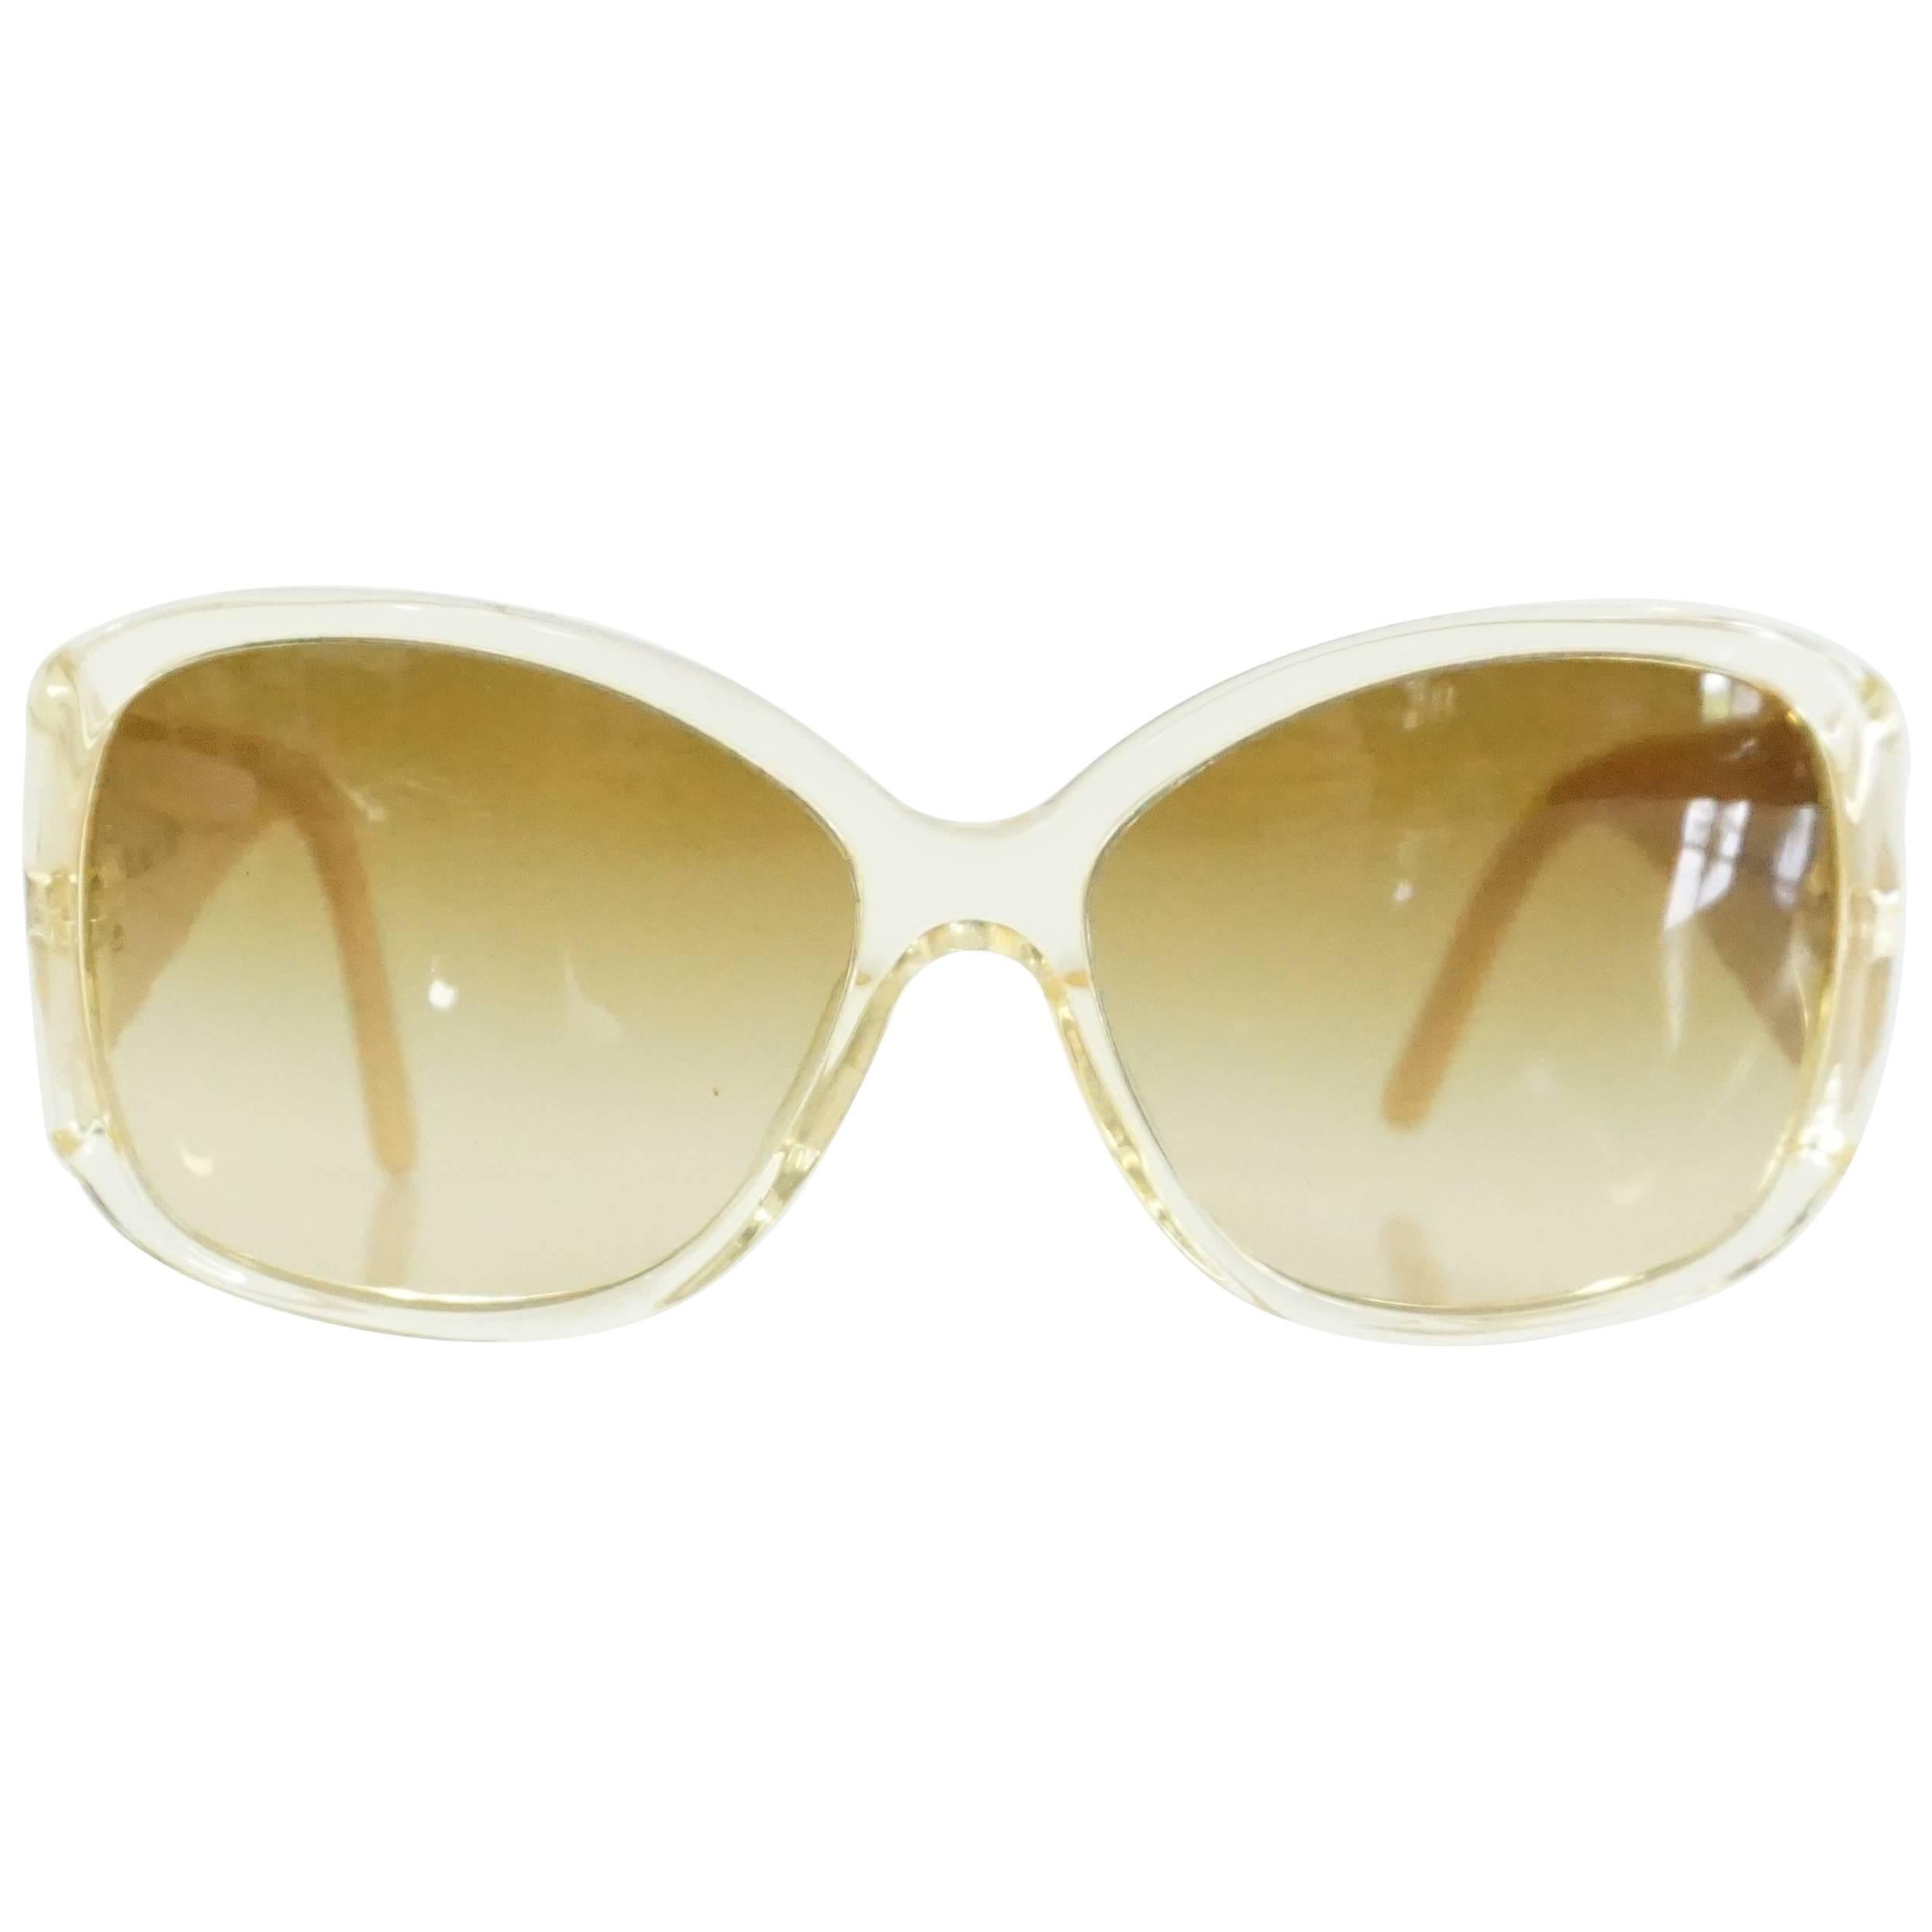 Versace Beige with White and Gold Bow Detailing Sunglasses